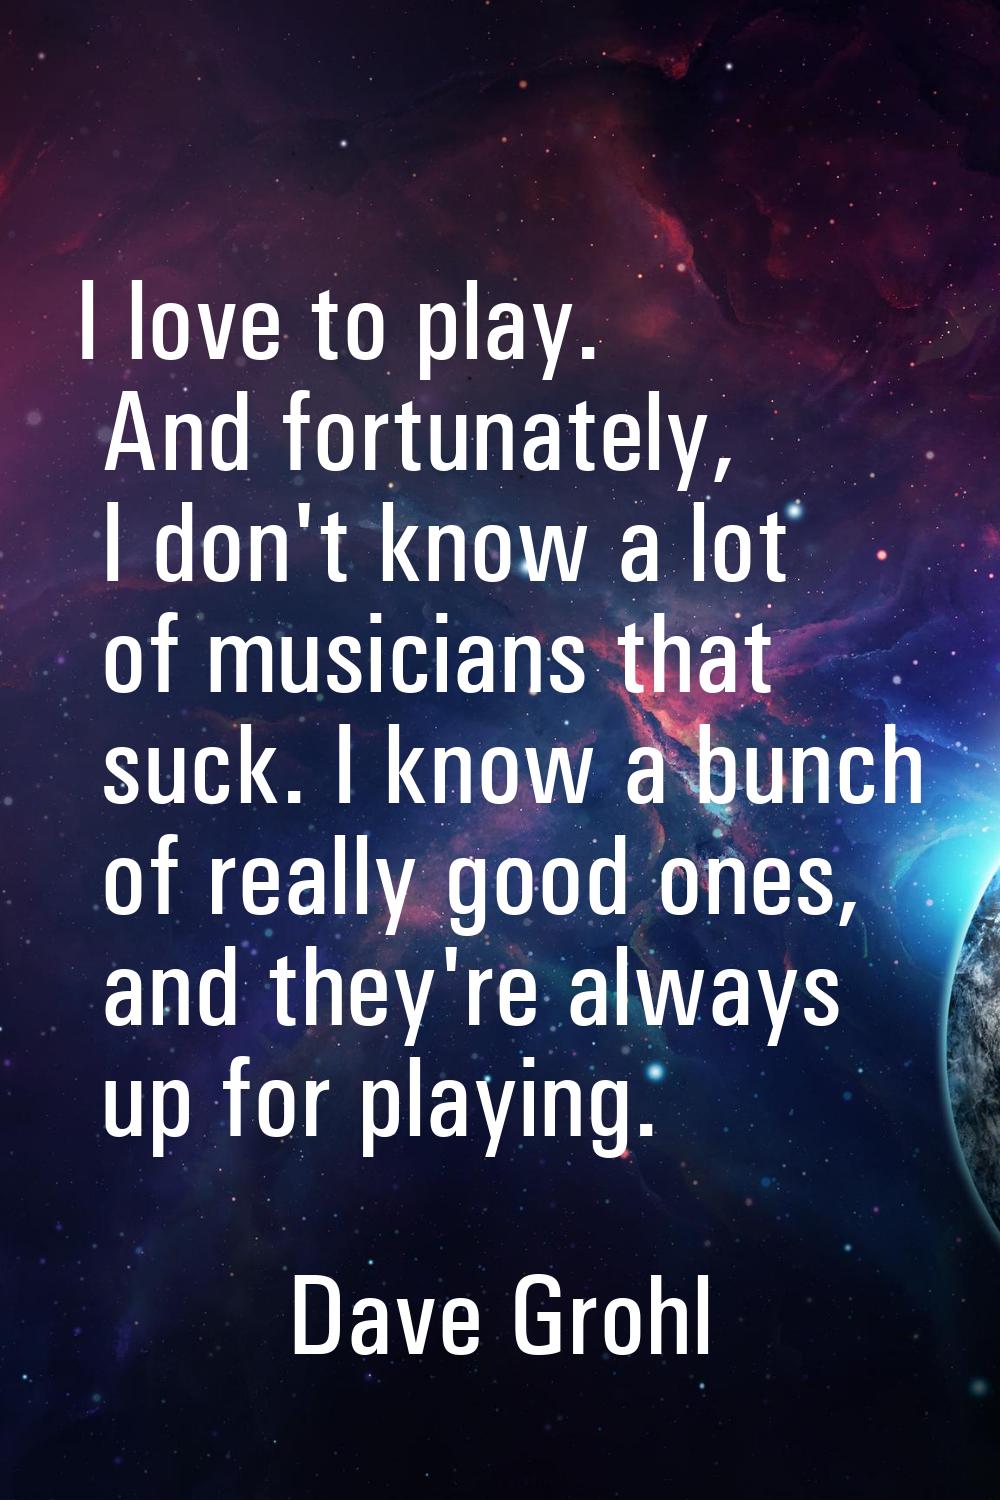 I love to play. And fortunately, I don't know a lot of musicians that suck. I know a bunch of reall